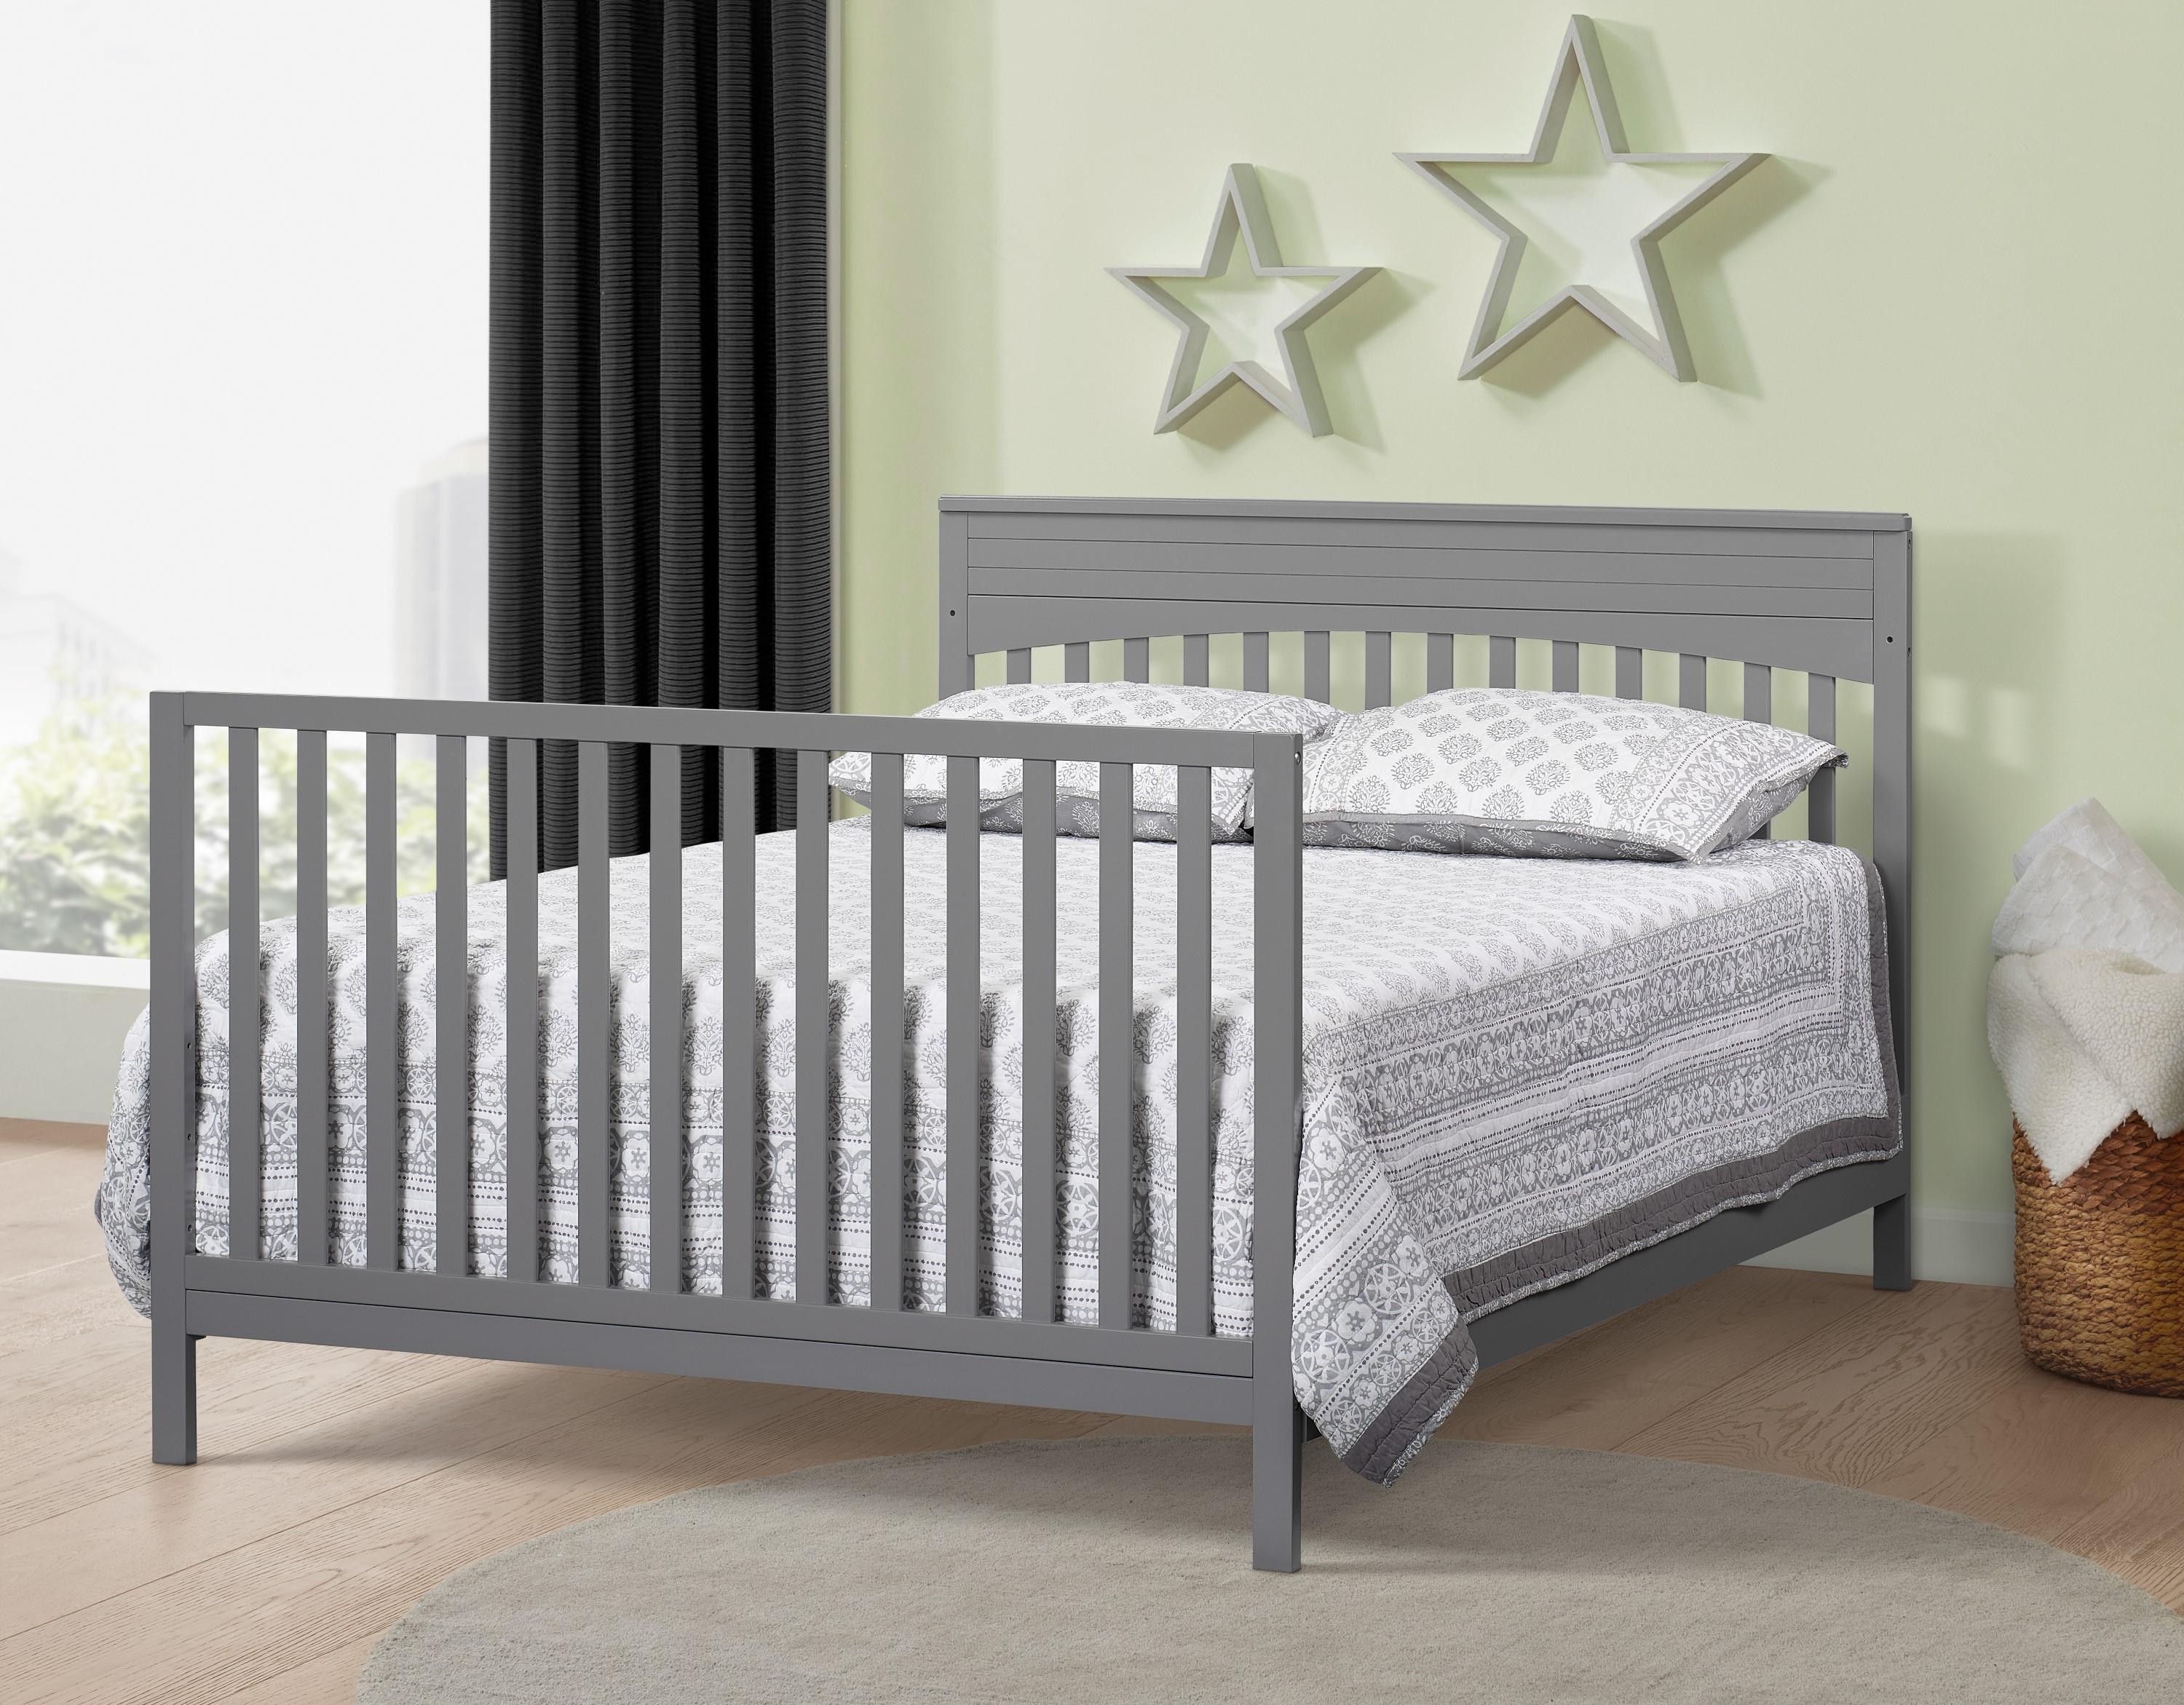 Oxford Baby Harper 4-in-1 Convertible Crib, Dove Gray, GREENGUARD Gold Certified, Wooden Crib - image 4 of 11